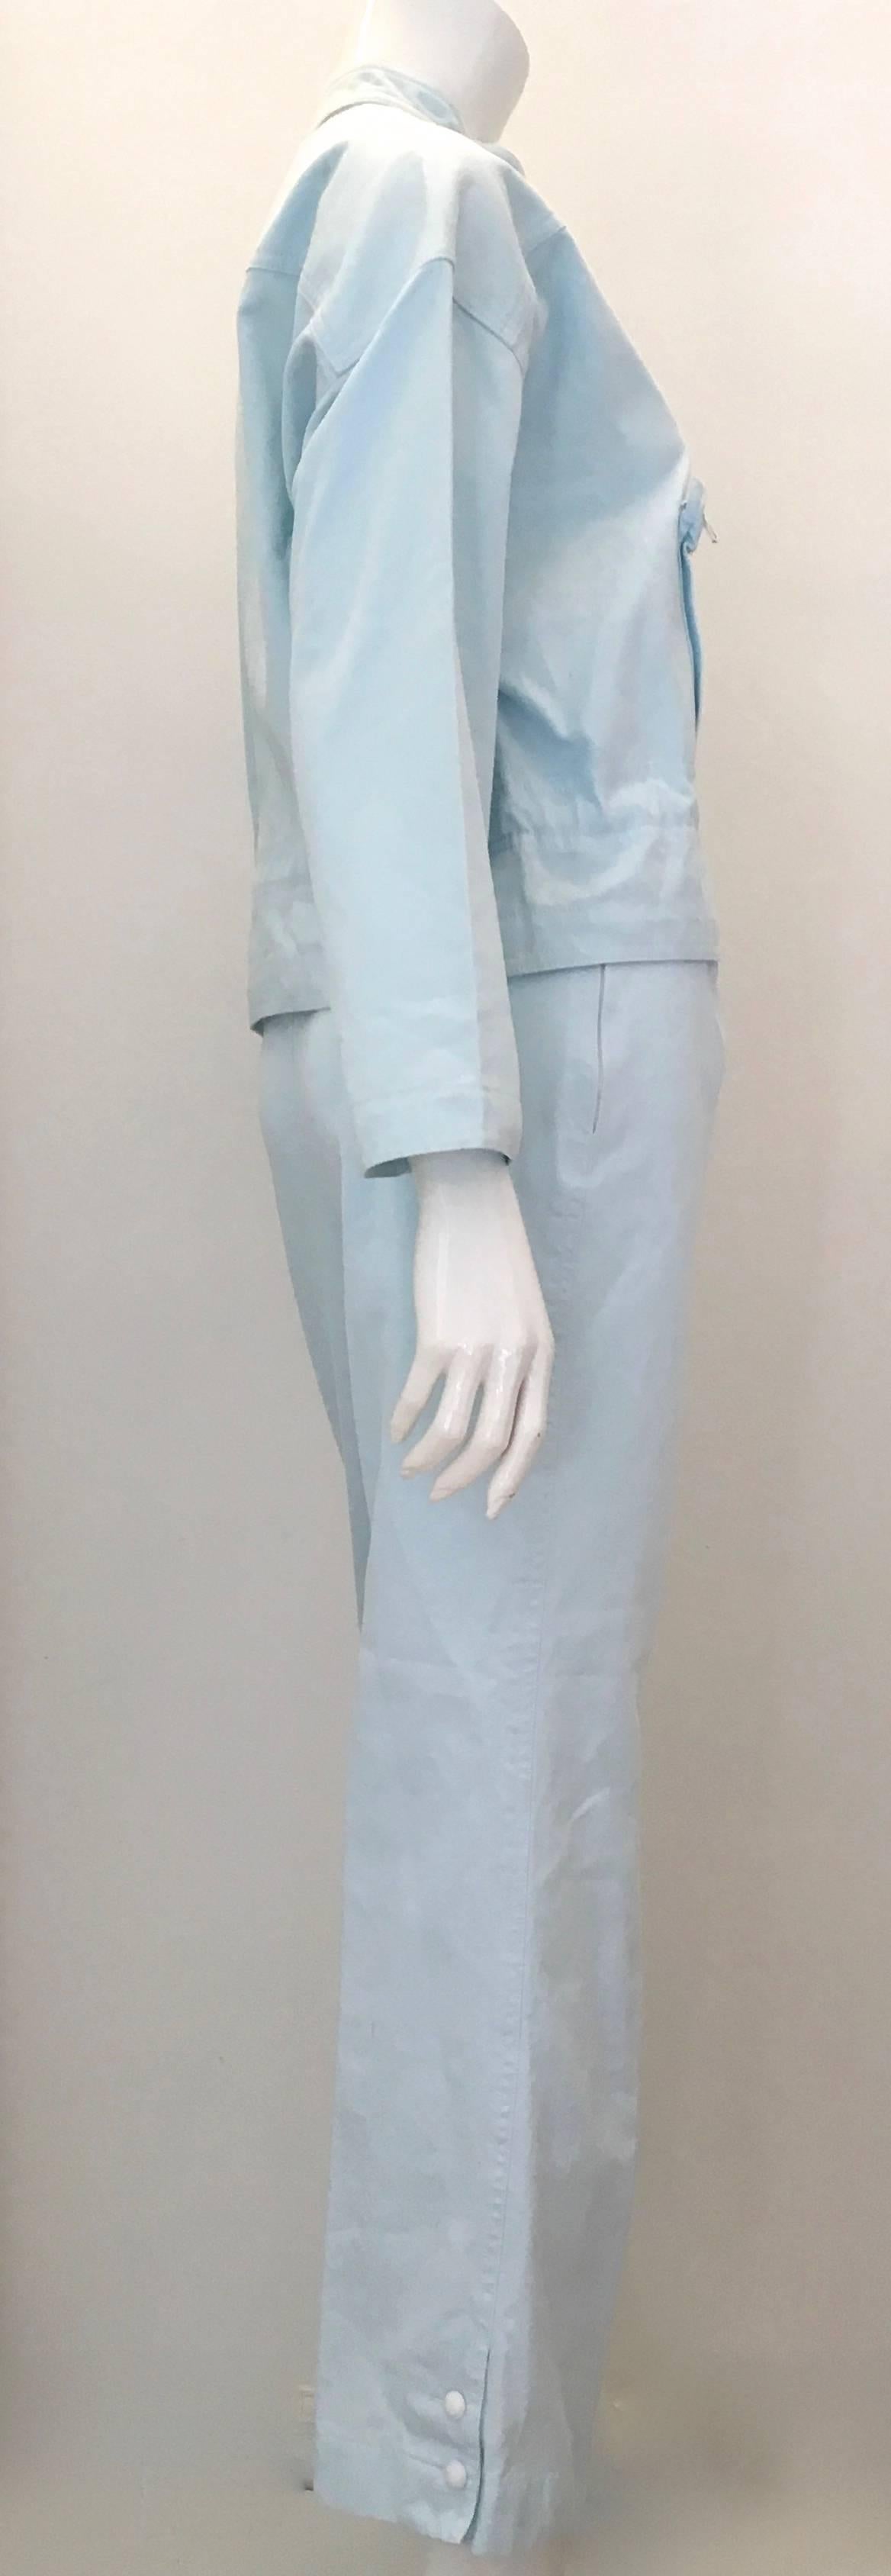 Presented here is a 2 piece light blue Courreges Pant suit. This is a casual day time Courreges ensemble from the 1980’s. It is meant to be worn together, but the jacket is fabulous on its own. The jacket is marked size ‘Medium’ and has a string tie